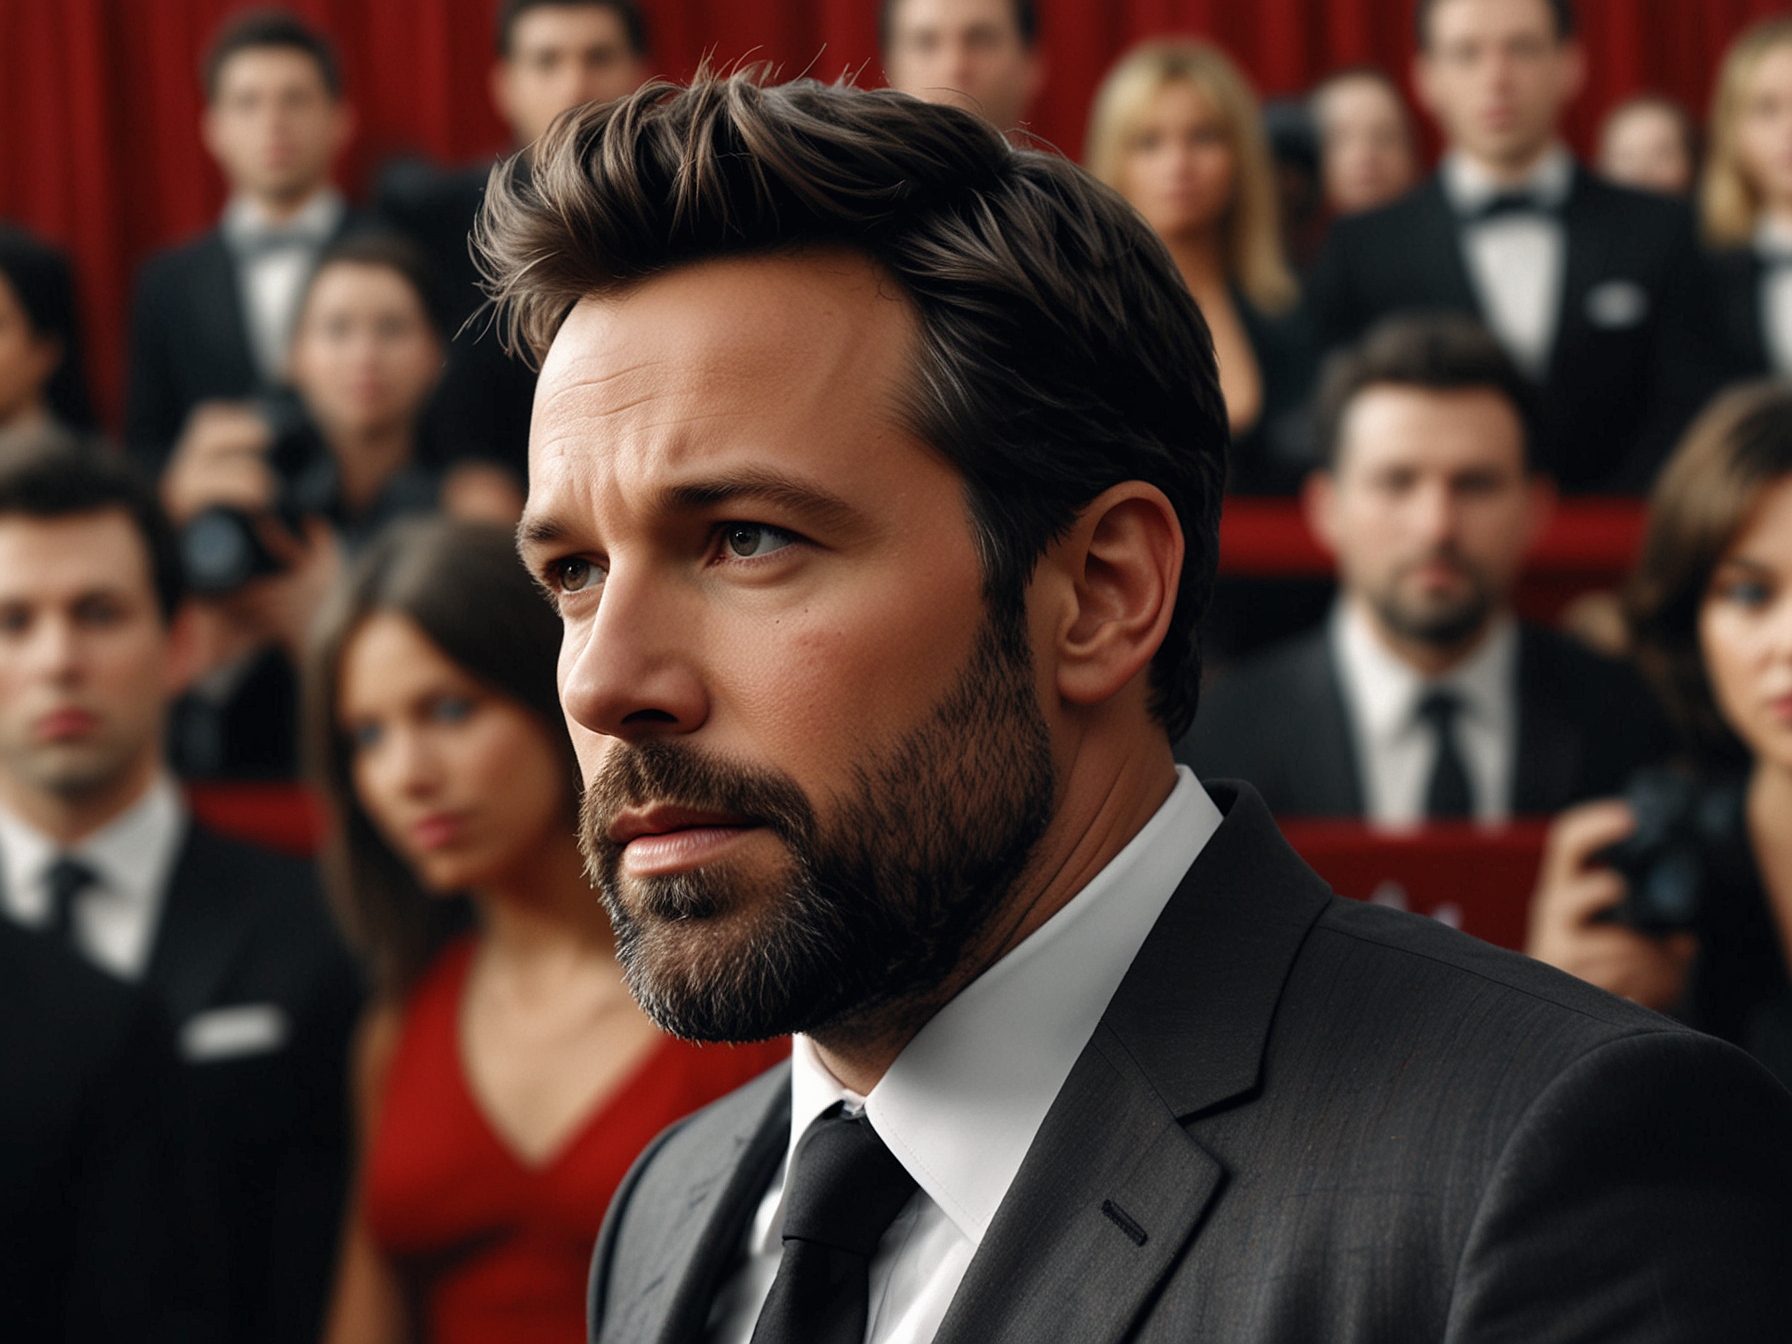 Ben Affleck on the red carpet, with a solemn expression, amidst flashing cameras and fans, perhaps reflecting the public scrutiny affecting his personal and professional life.